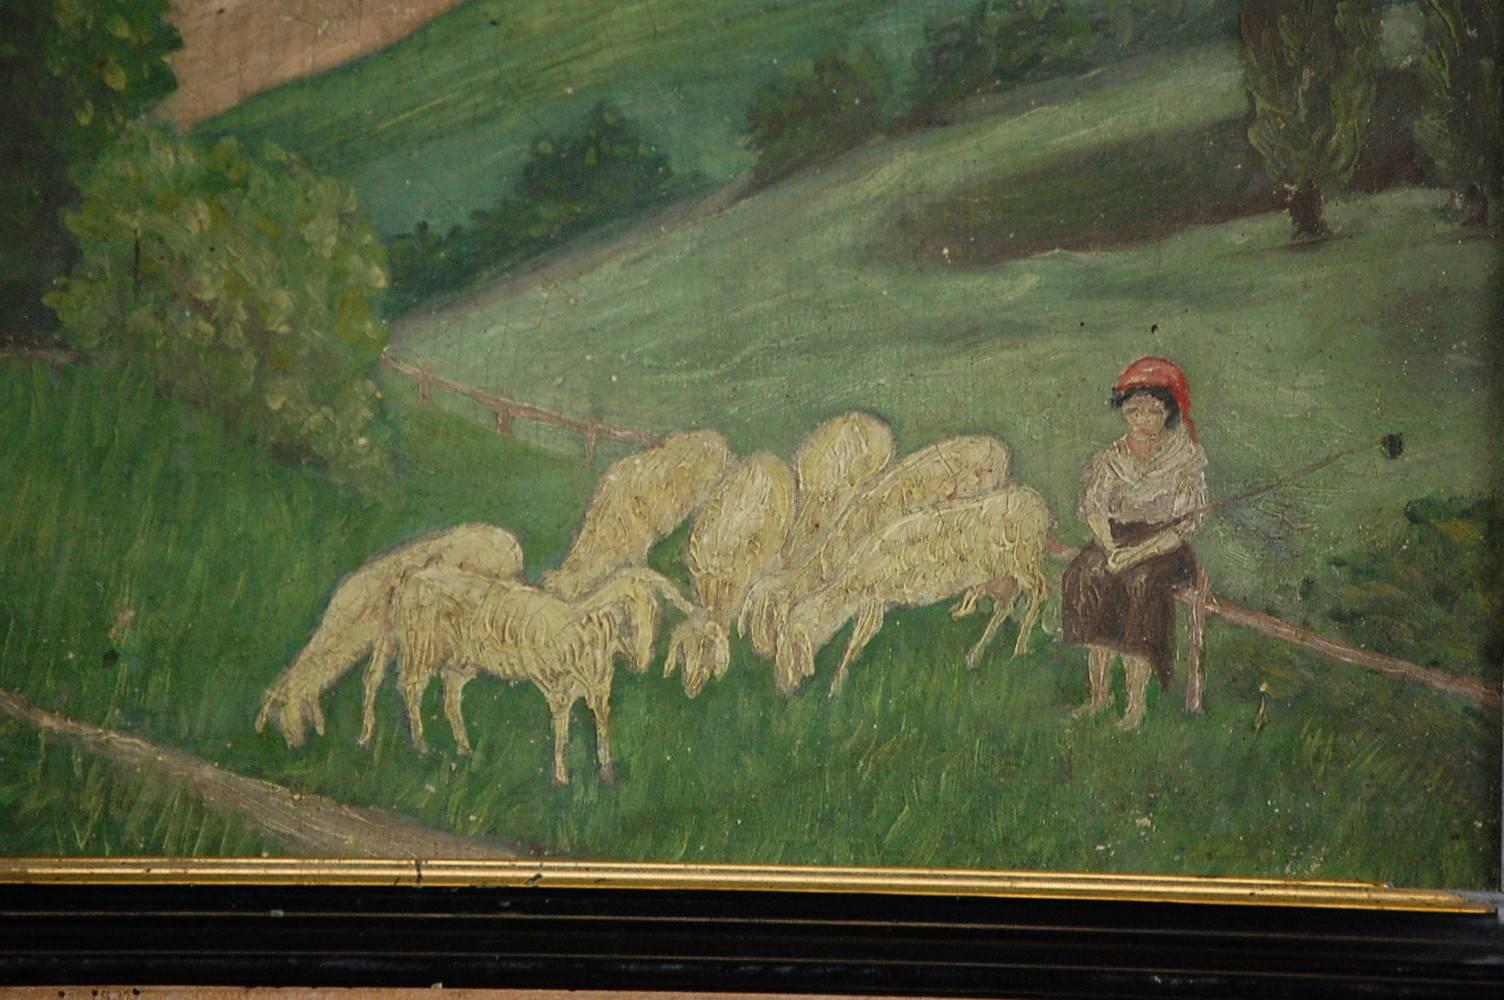 Naïve 19th century oil on canvas, unstretchered, over board and under glass, depicting Mary and her little lamb(s), minor paint loss, and craquelure. Some losses to frame. Unattributed. Measurement includes frame, English, circa 1890.